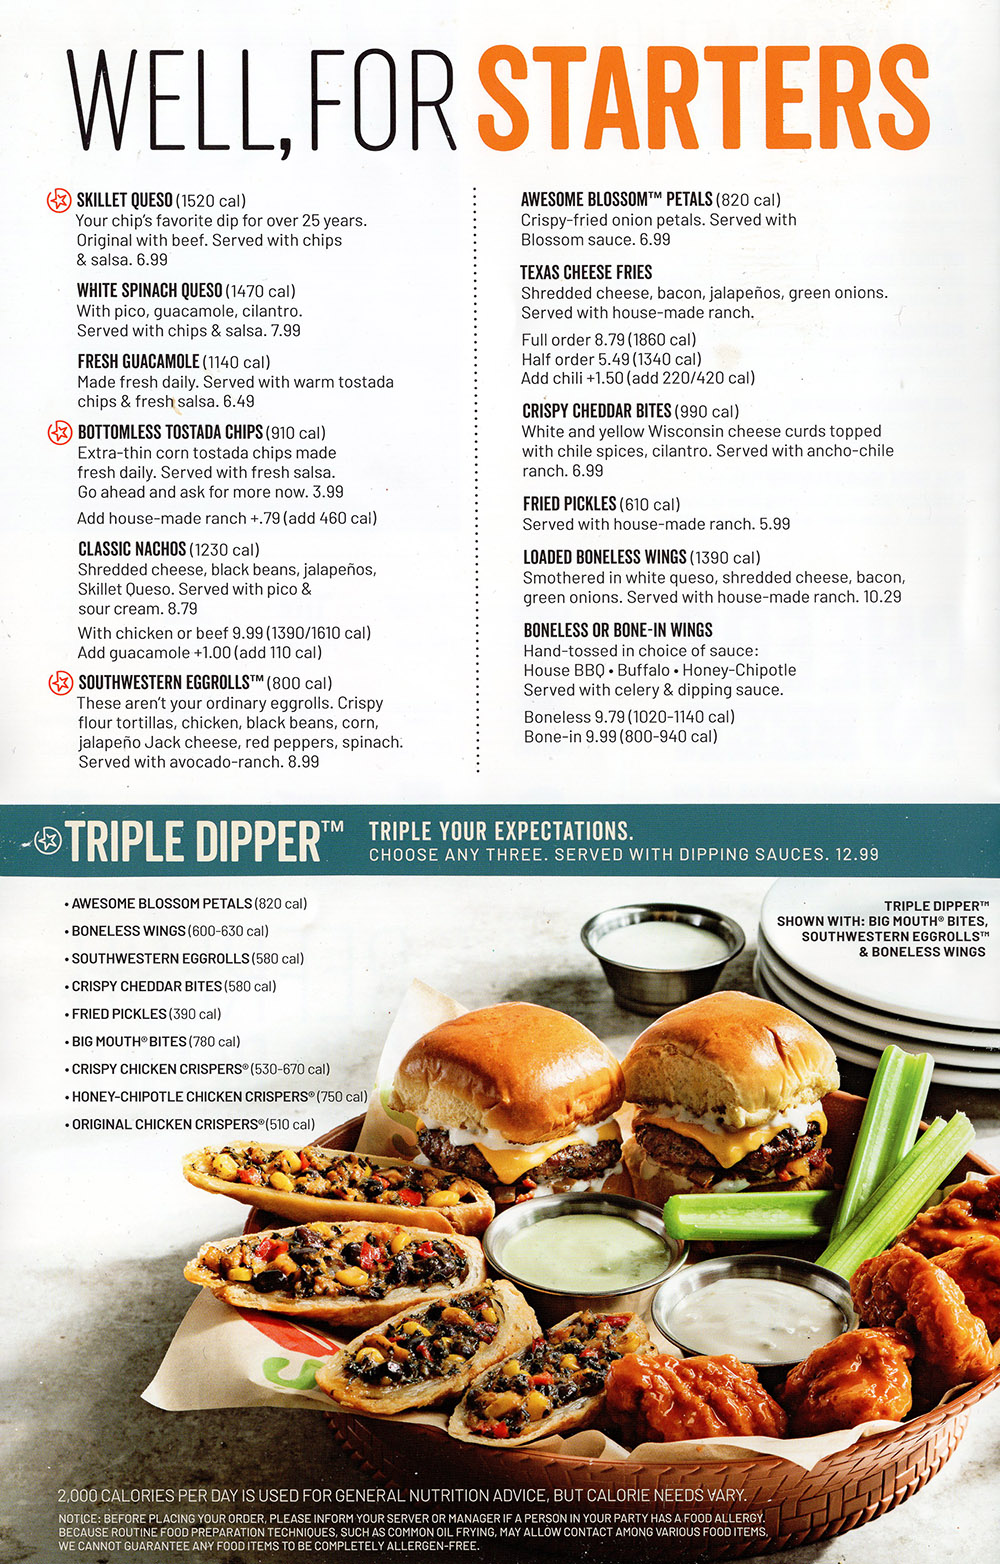 Chili's Menu - Lincoln Nebraska - Provided by Metro Dining Delivery
Chili's Bar & Grill Menu - 6730 S 27th St, Lincoln, NE 68512 - 402-420-2800 - Bar & Grill - American - Appetizers - Burgers - Sandwiches - Steaks - Mex - Ribs - Wings - Fajitas - Burritos - Quesadillas - Soups - Chili - Lunch Specials - Salads - Desserts - Cocktails - Order Online - Lincoln Nebraska - Metro Dining Delivery
